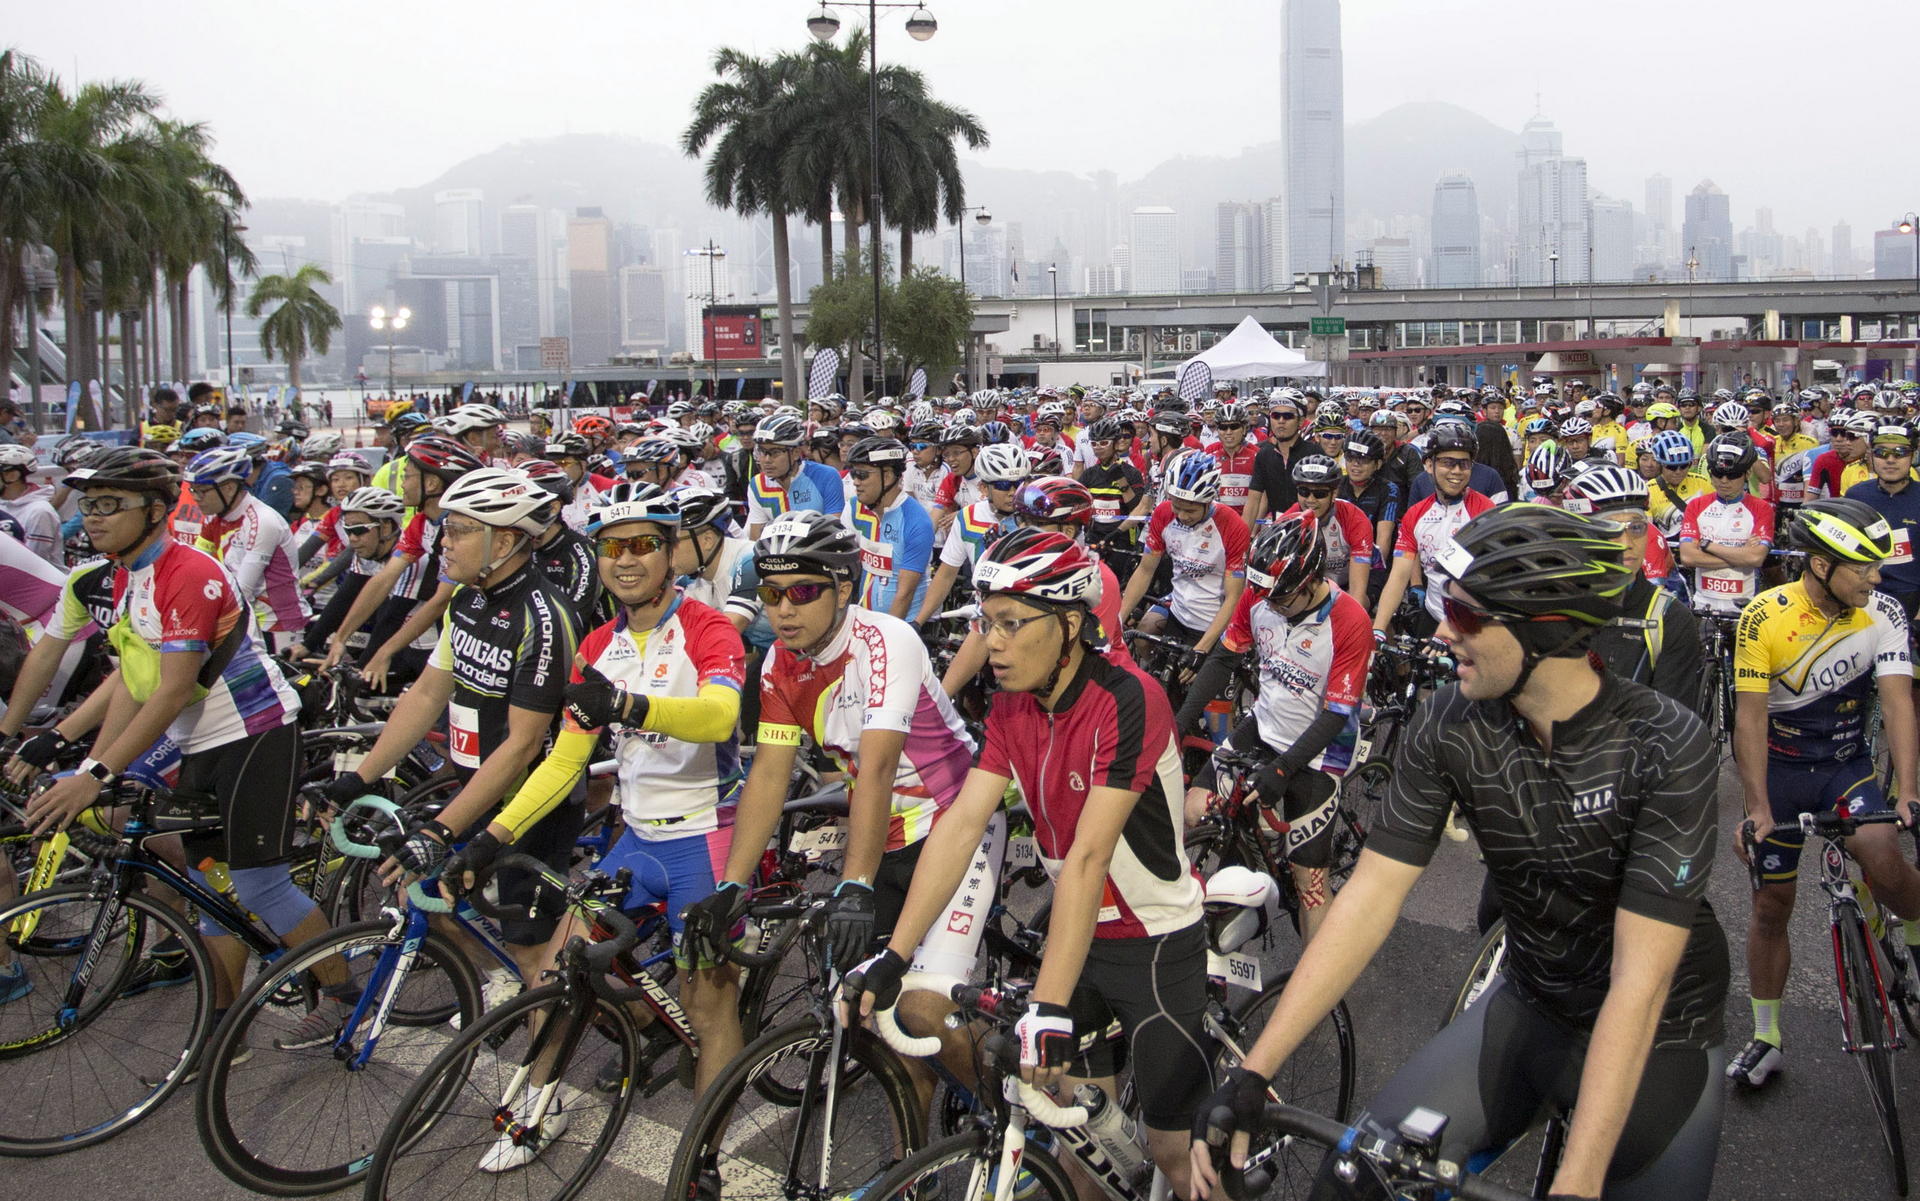 Riders line up at the start of the Cyclothon 35km race in Tsim Sha Tsui on Sunday. Photo: Reuters